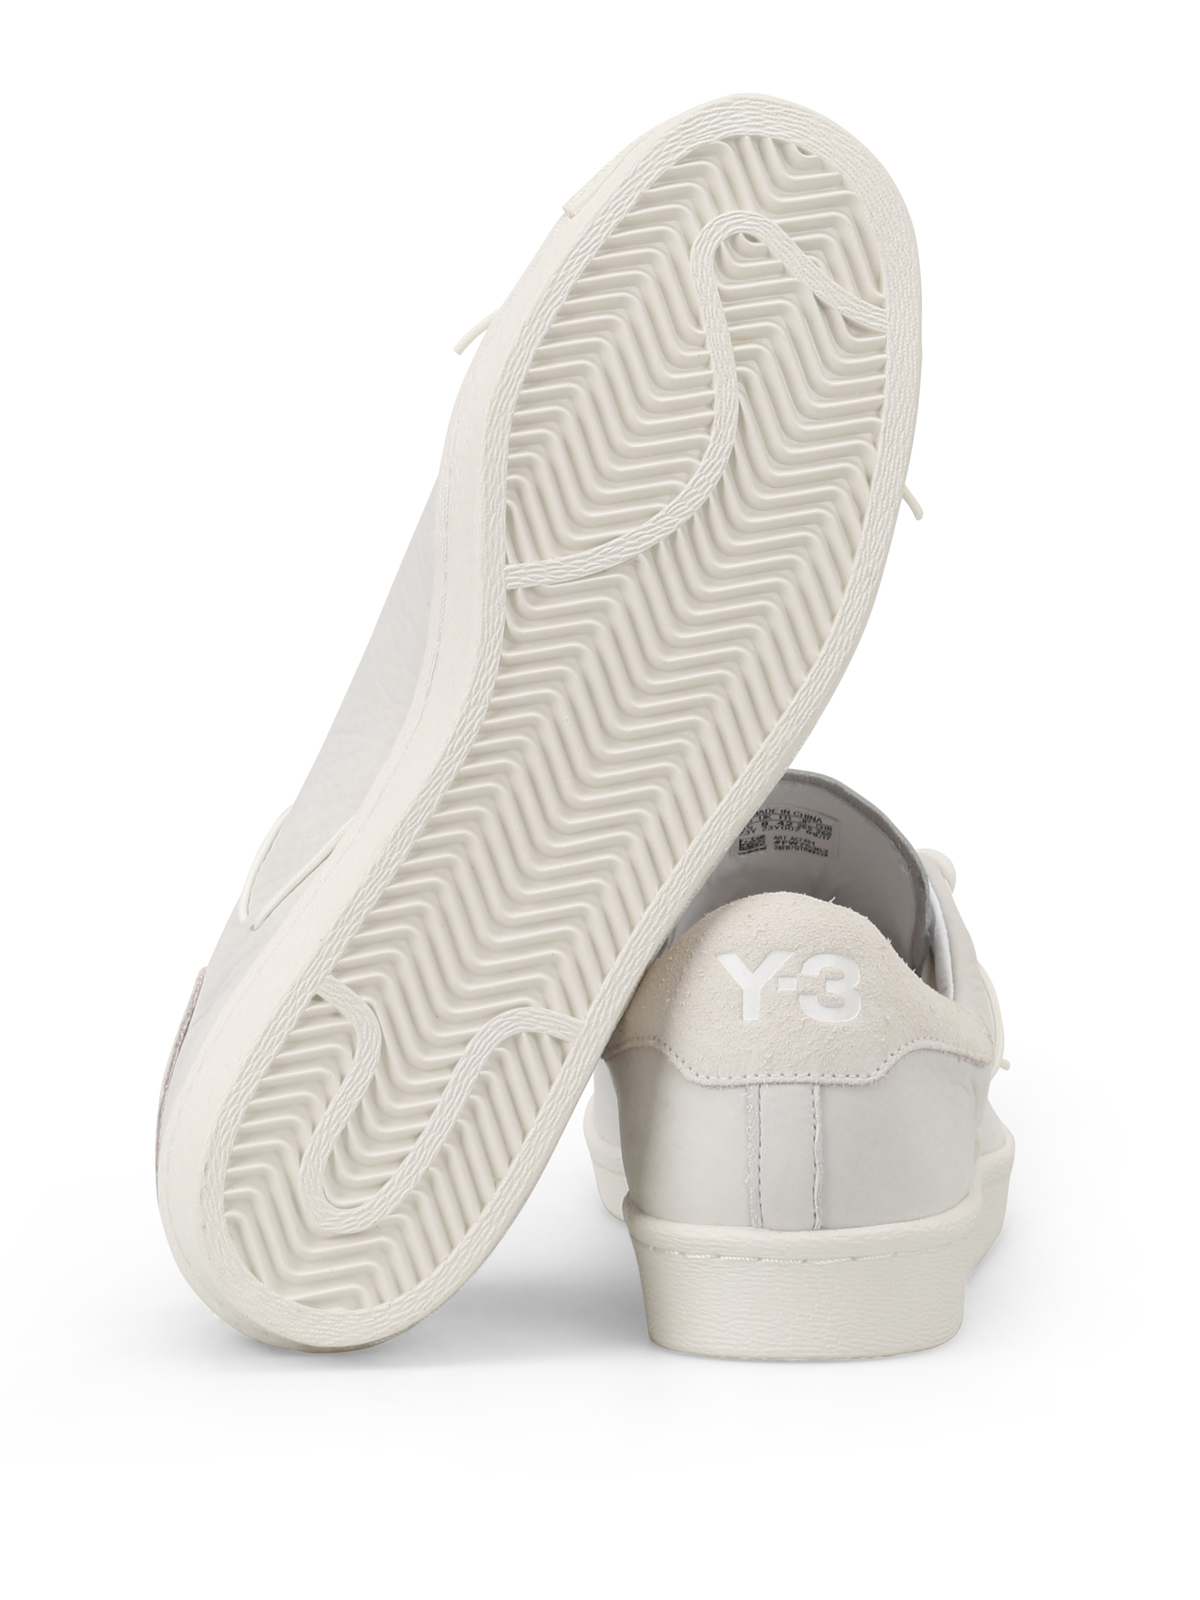 Trainers Adidas Y-3 - Super sneakers - AC7404 | thebs.com [ikrix.com]